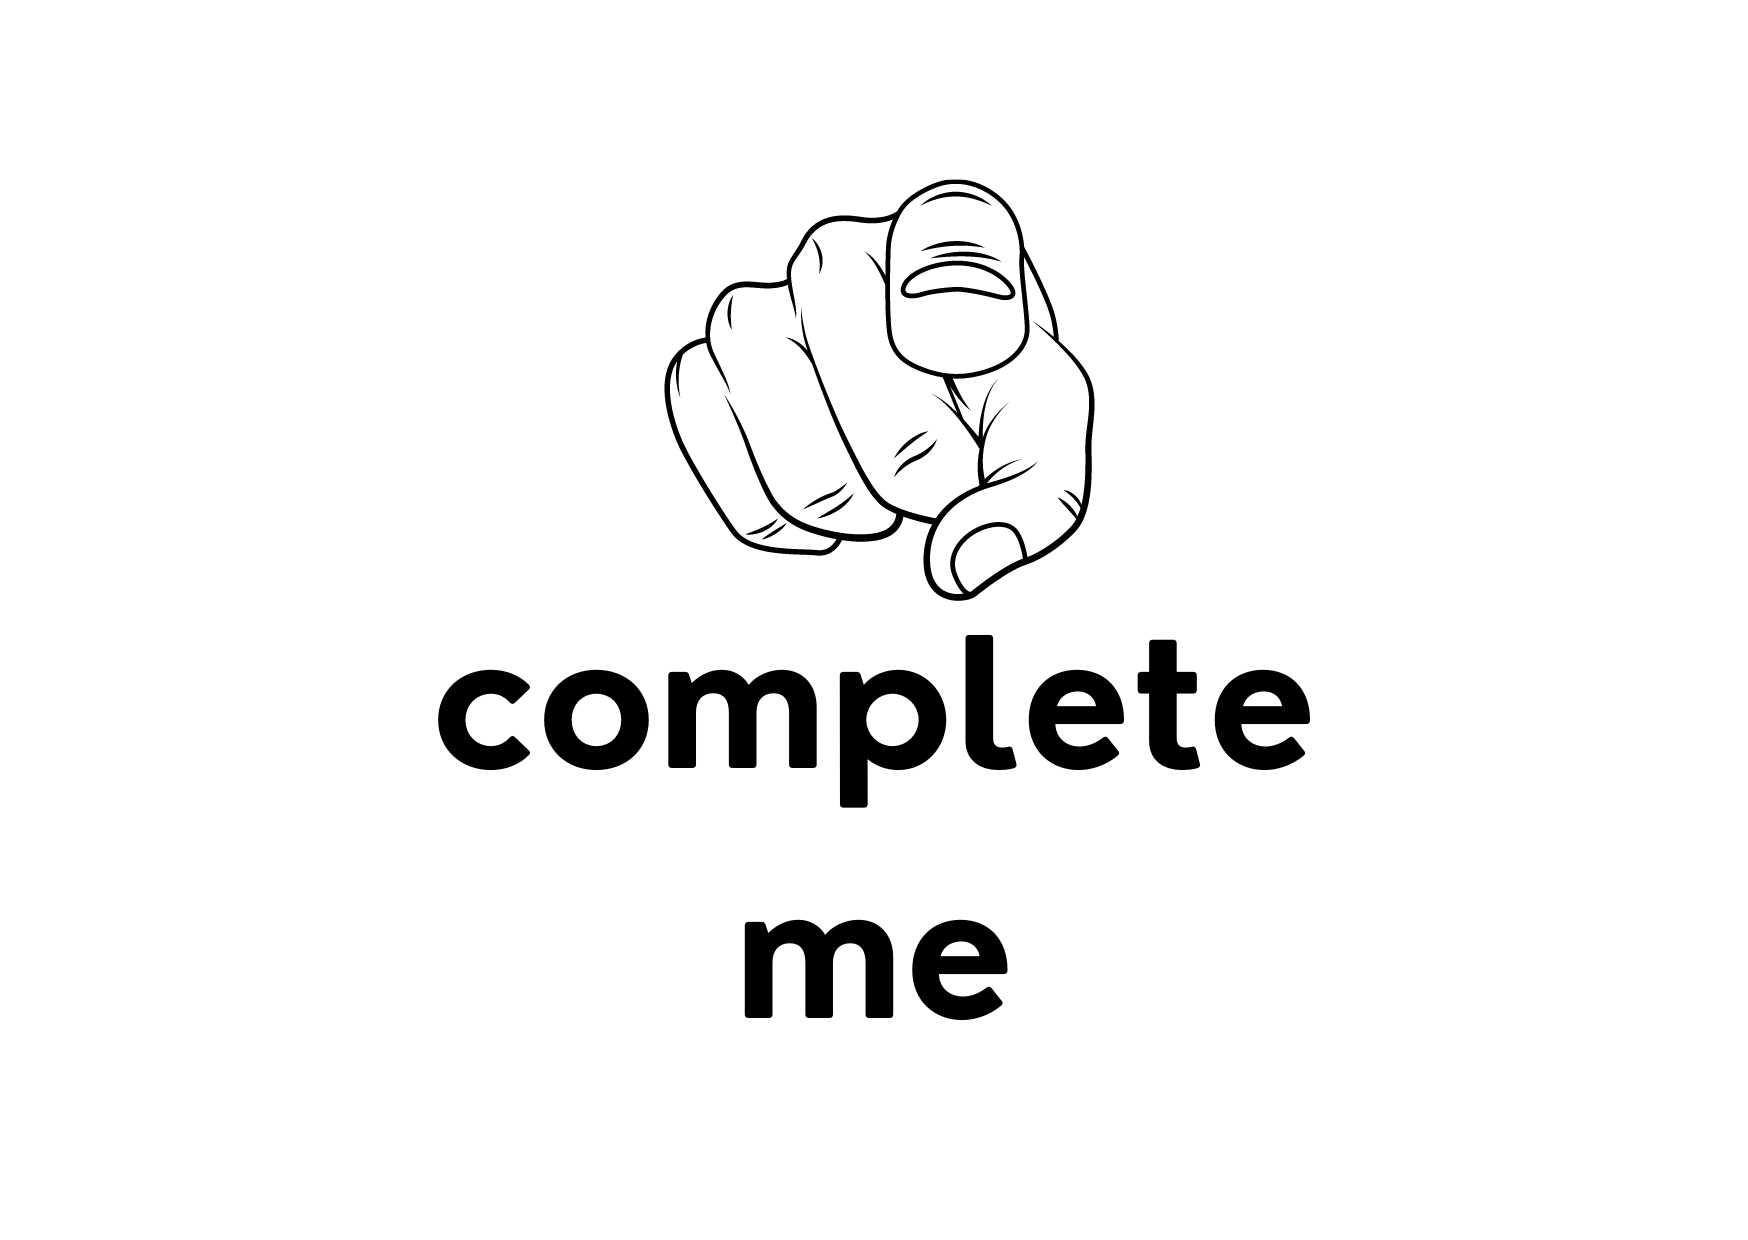 White seed paper greeting card with hand pointing and saying "complete me"